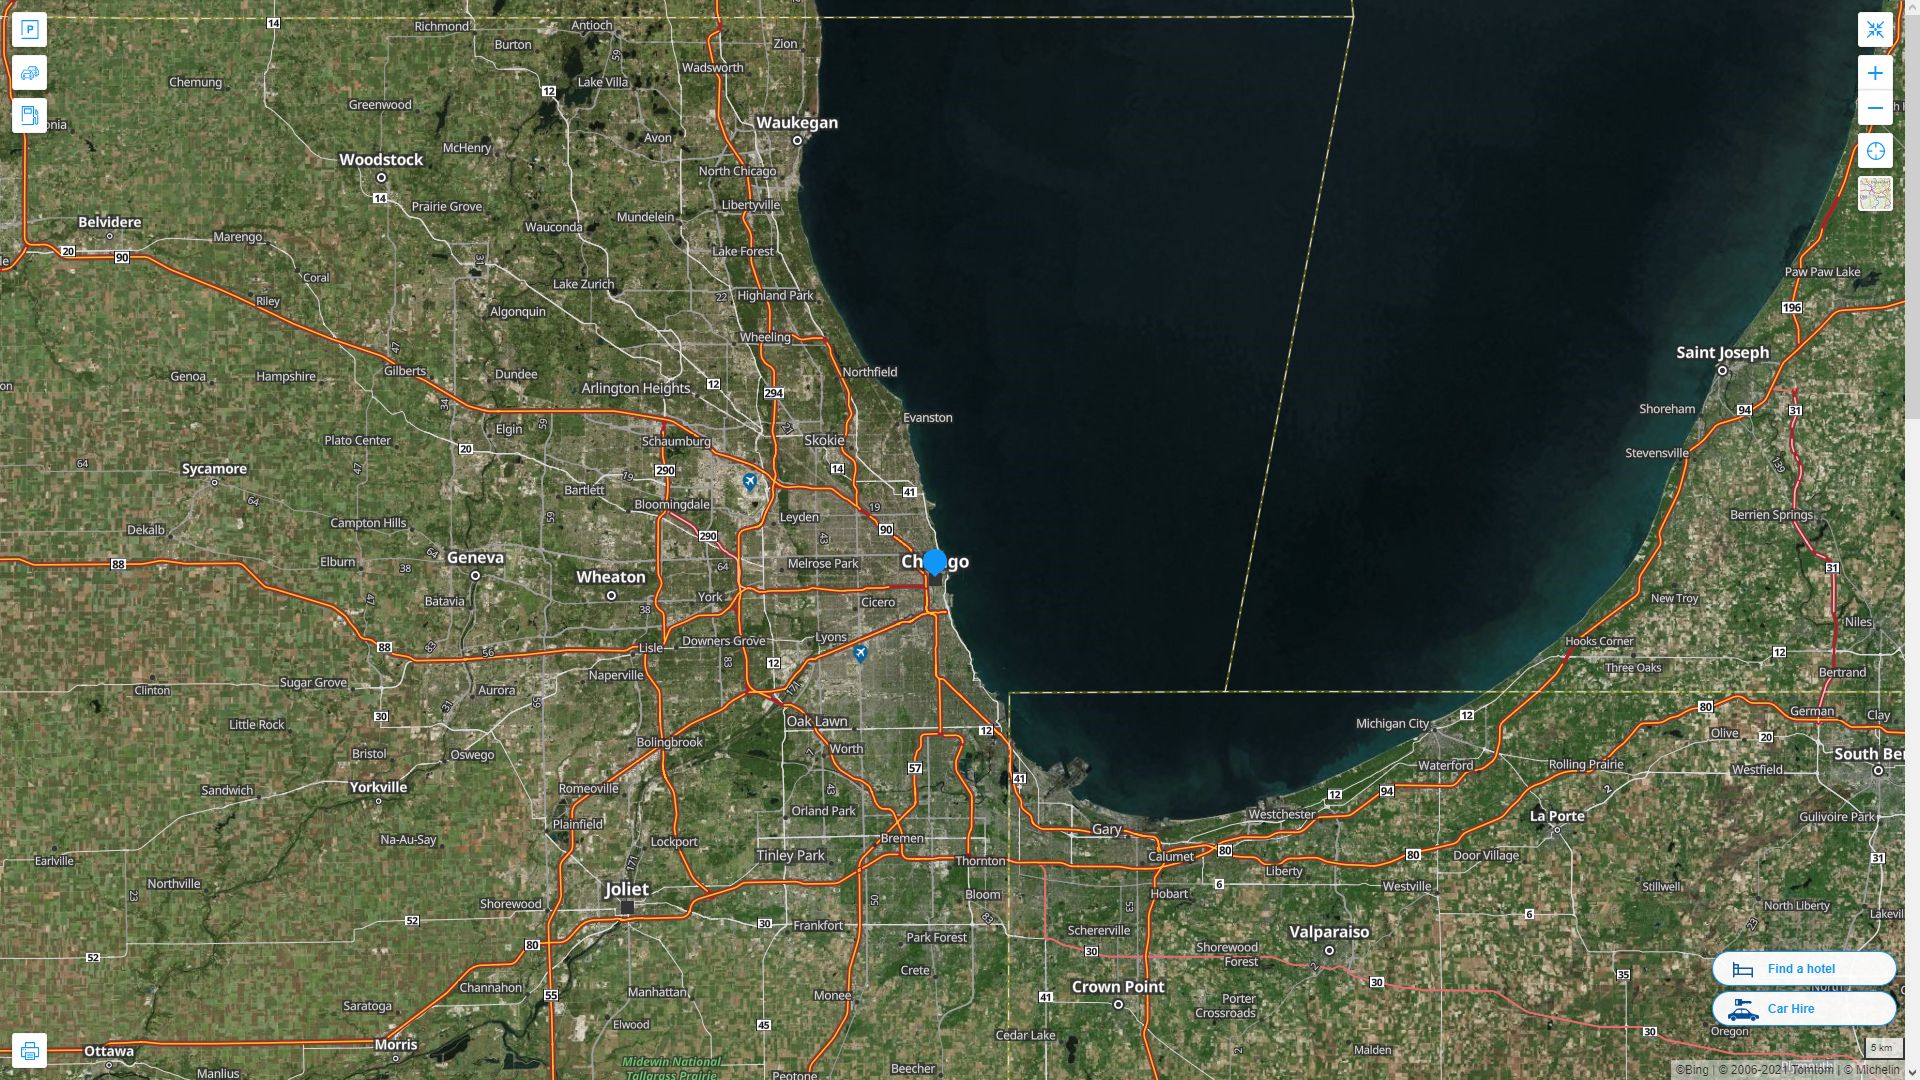 Chicago illinois Highway and Road Map with Satellite View